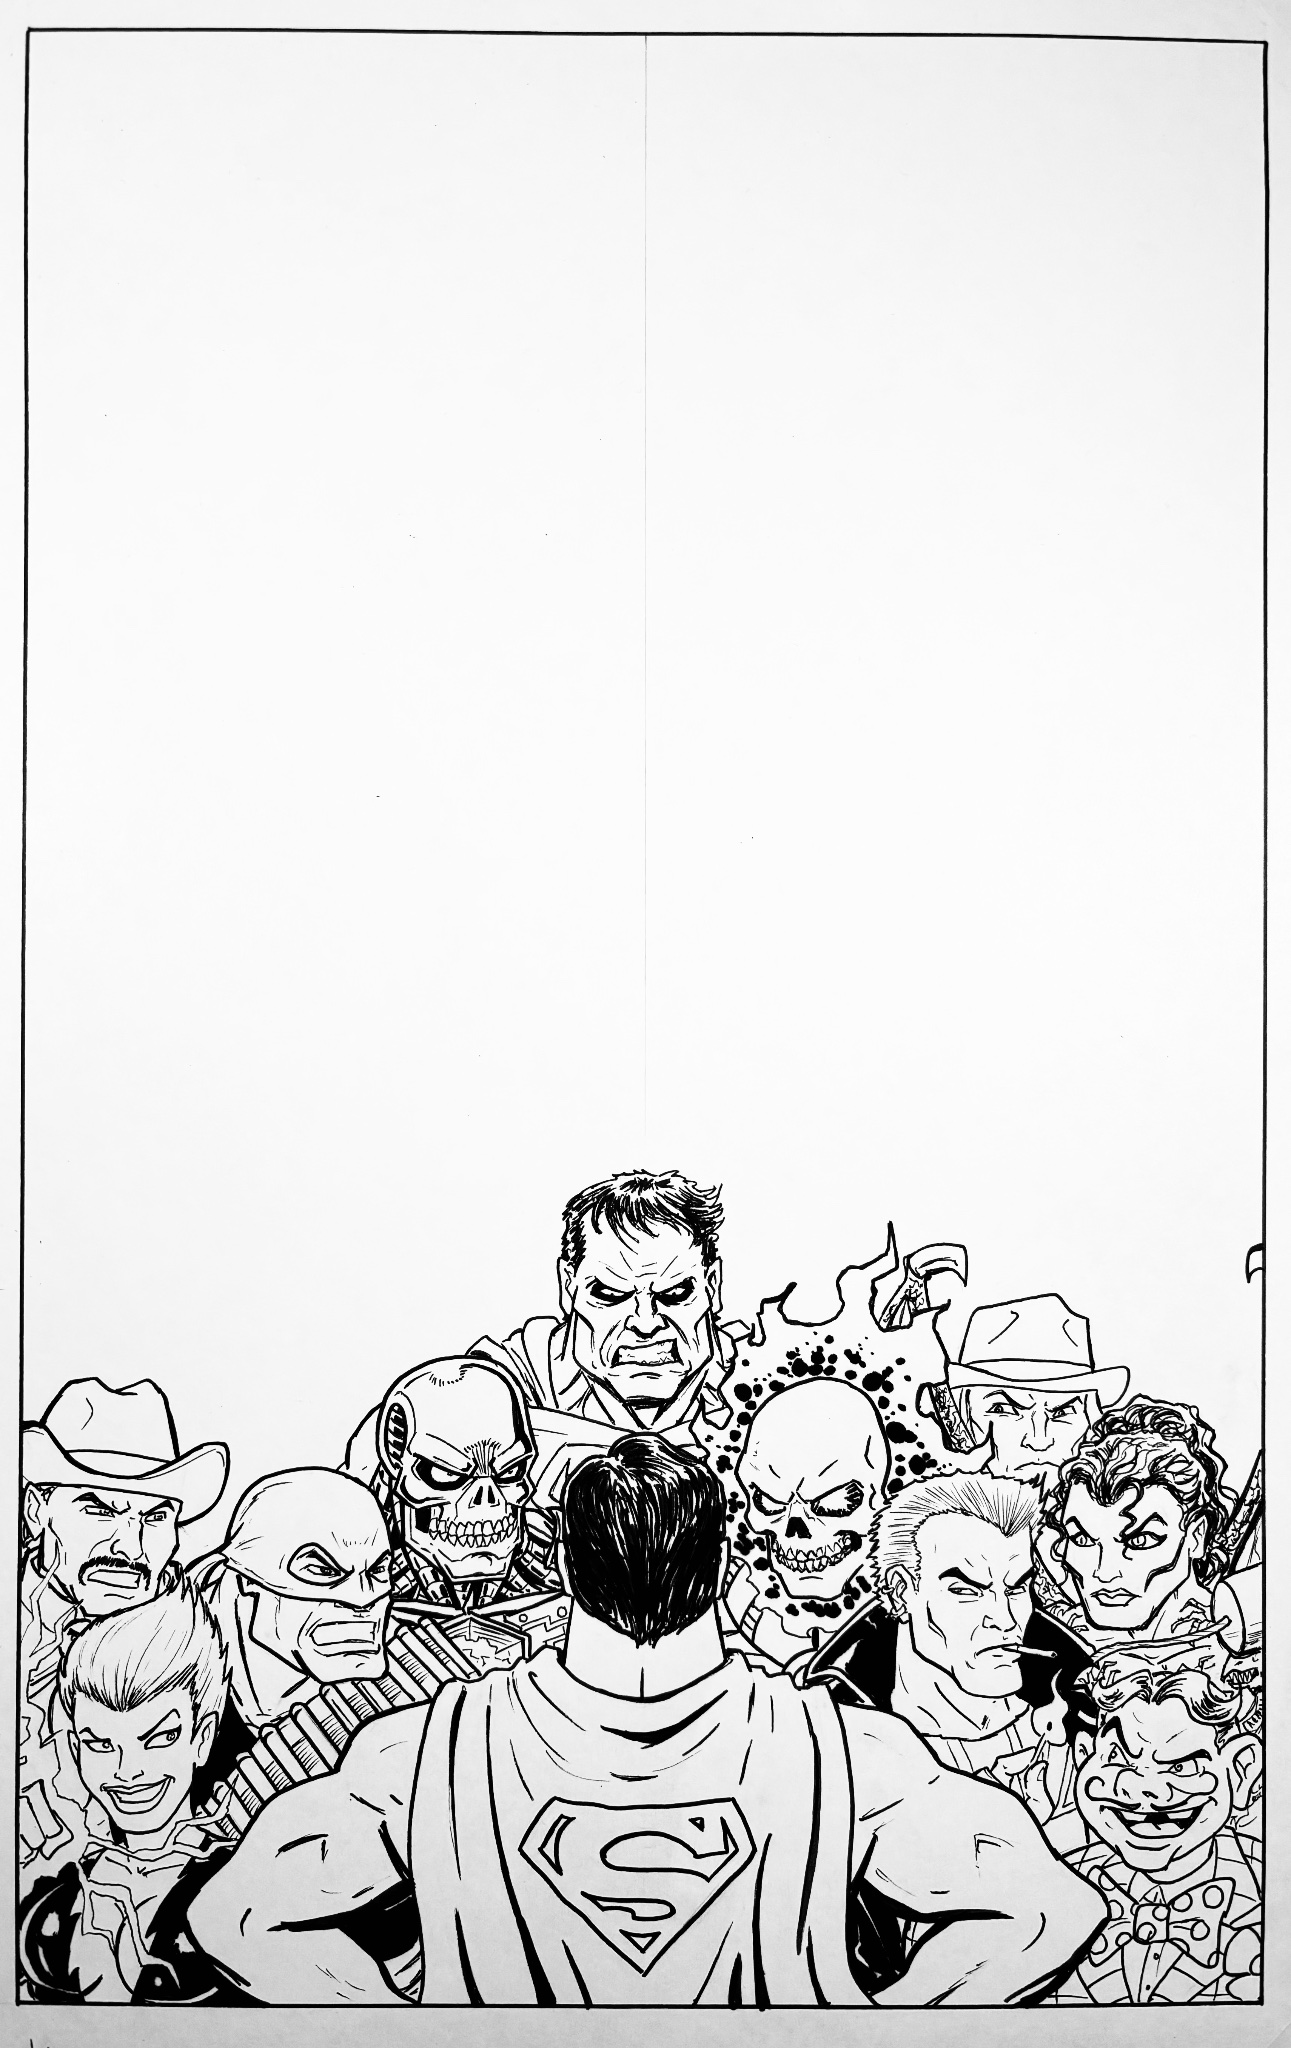 Hal haney on x superman rogues gallery progress today inks on superman livewire terra